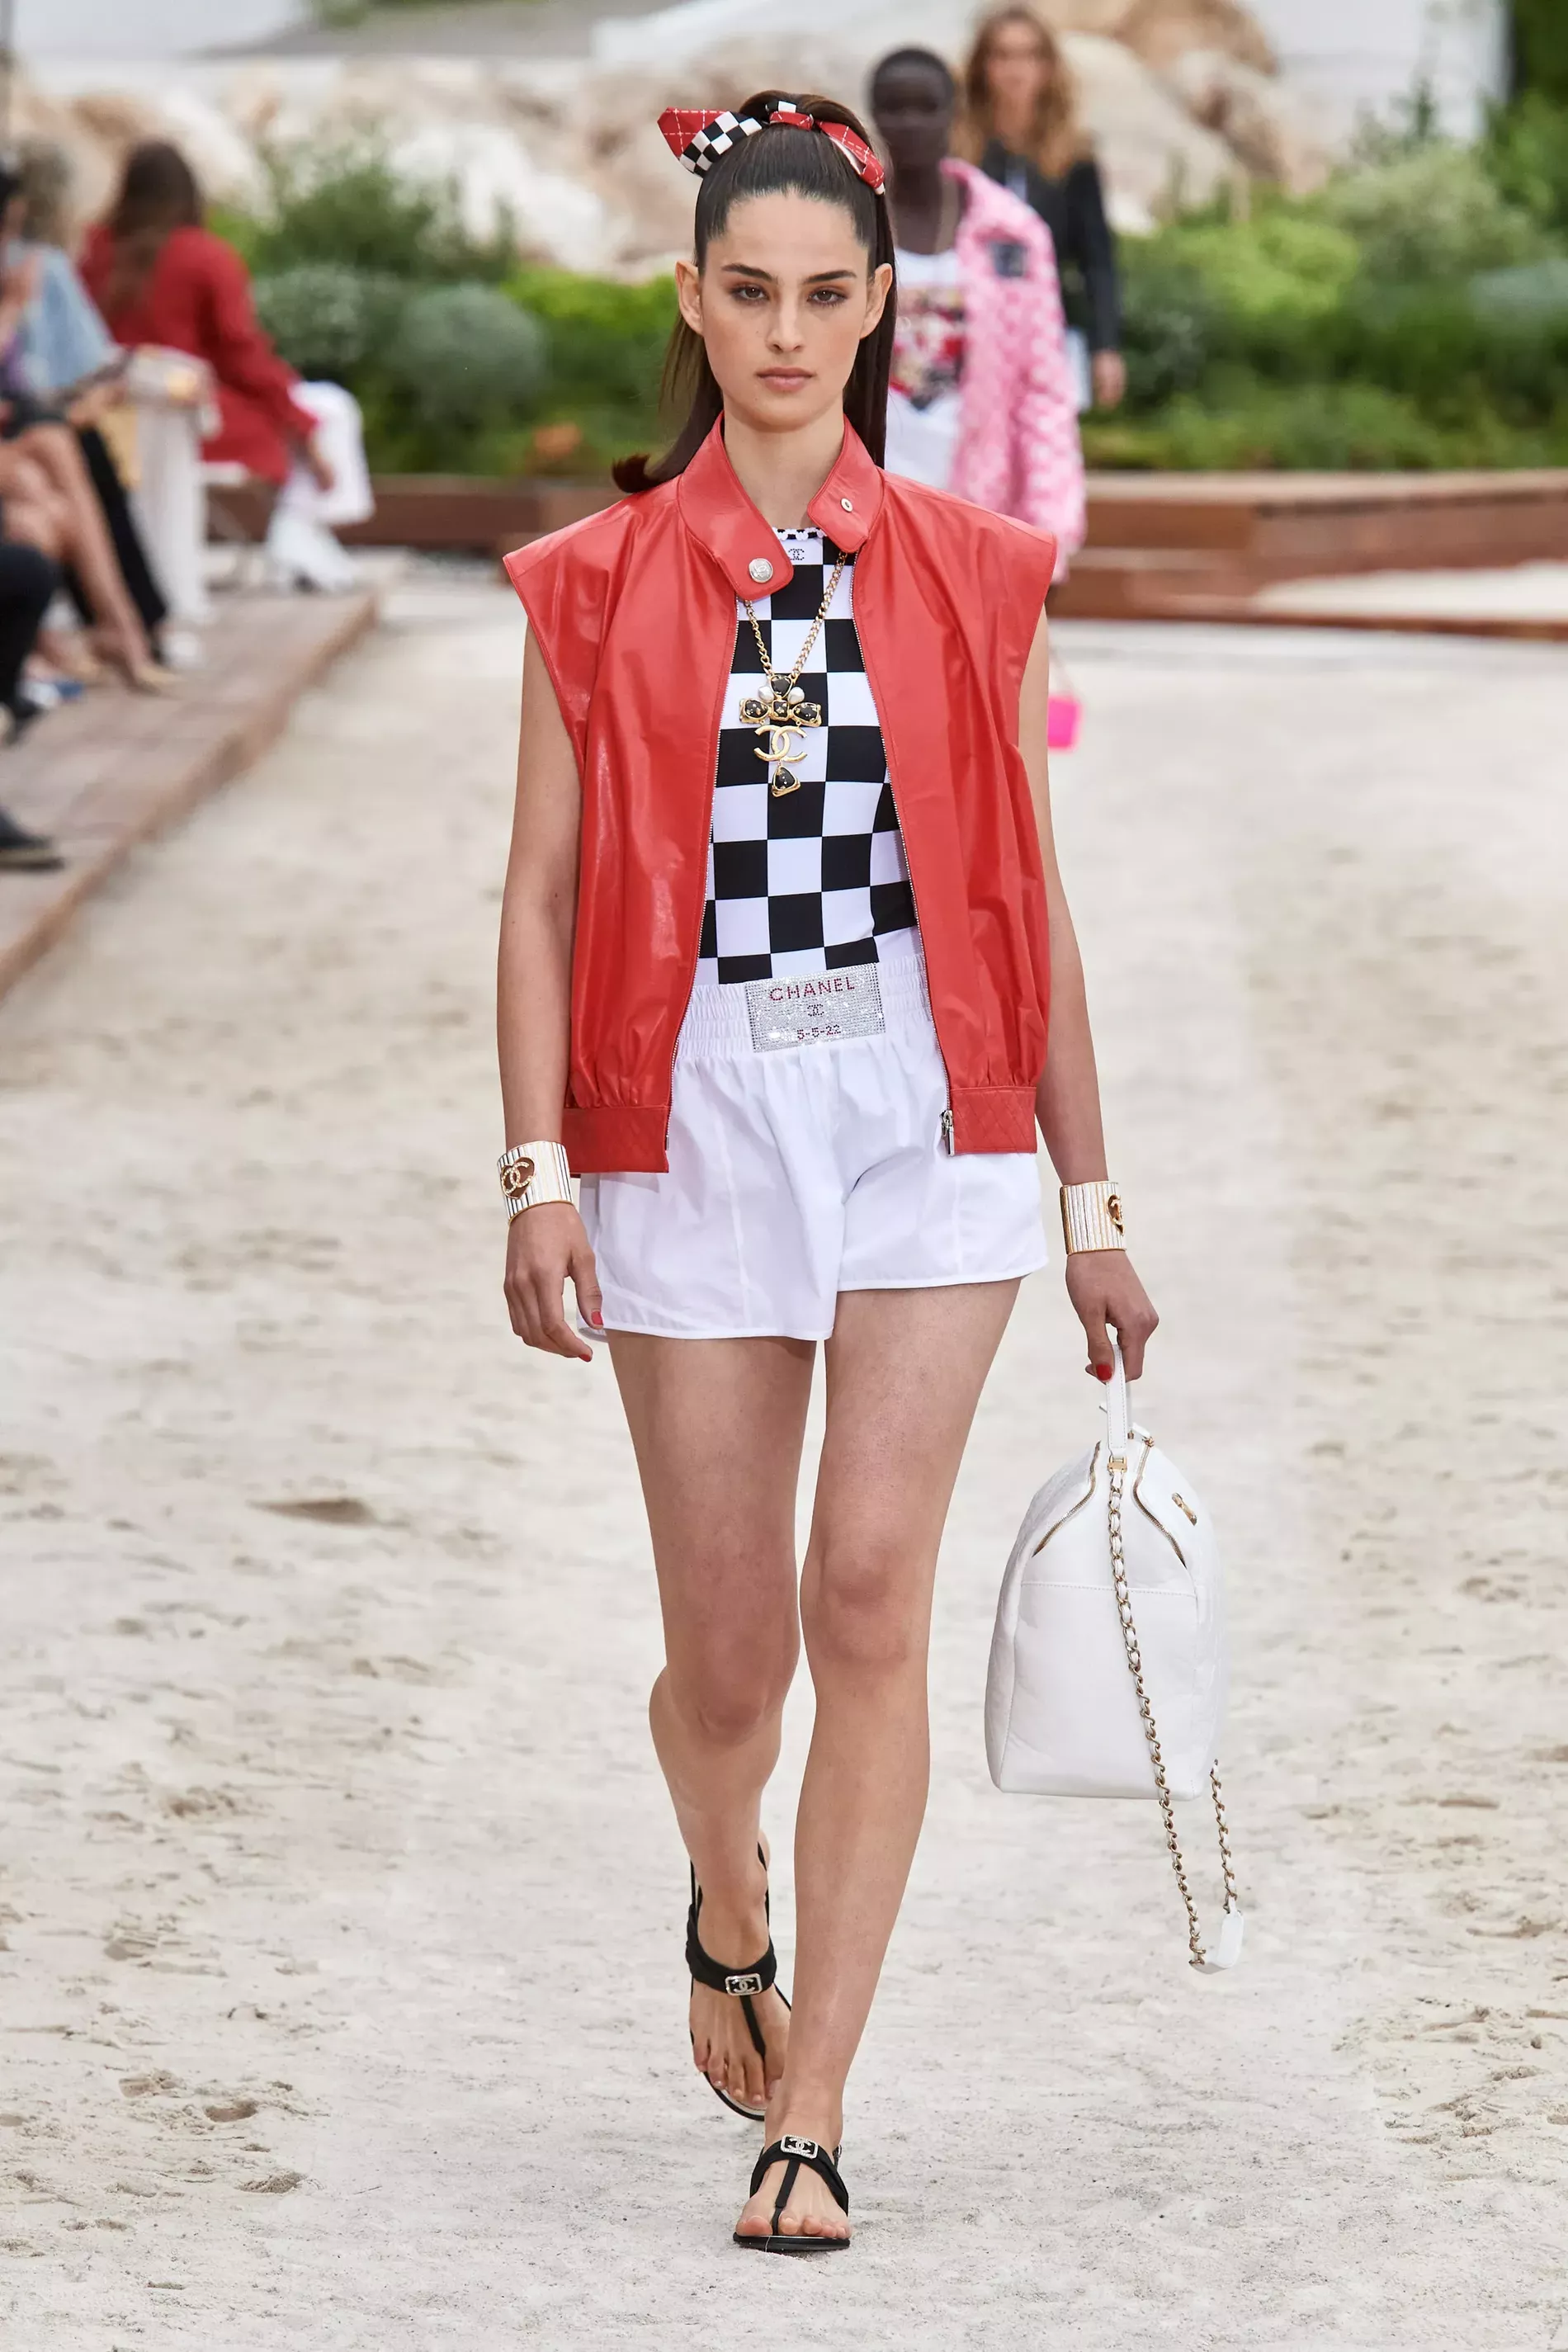 At the Chanel Cruise 2023 show, the bride was bohemian for her